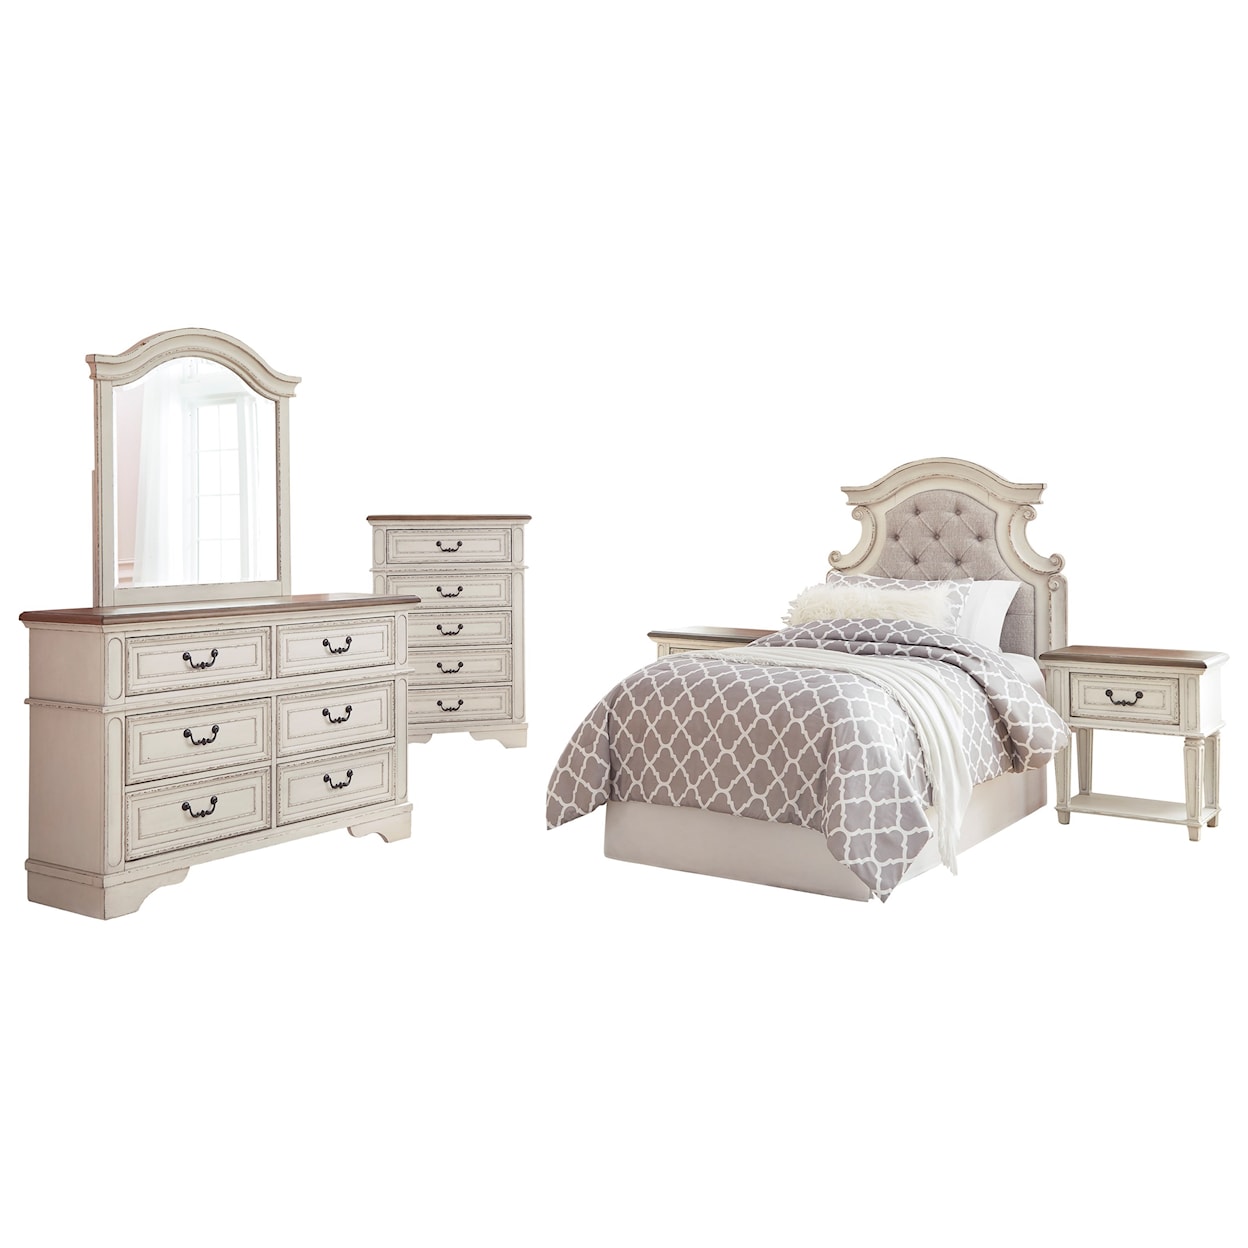 Signature Design by Ashley Realyn 5pc Twin Bedroom Group